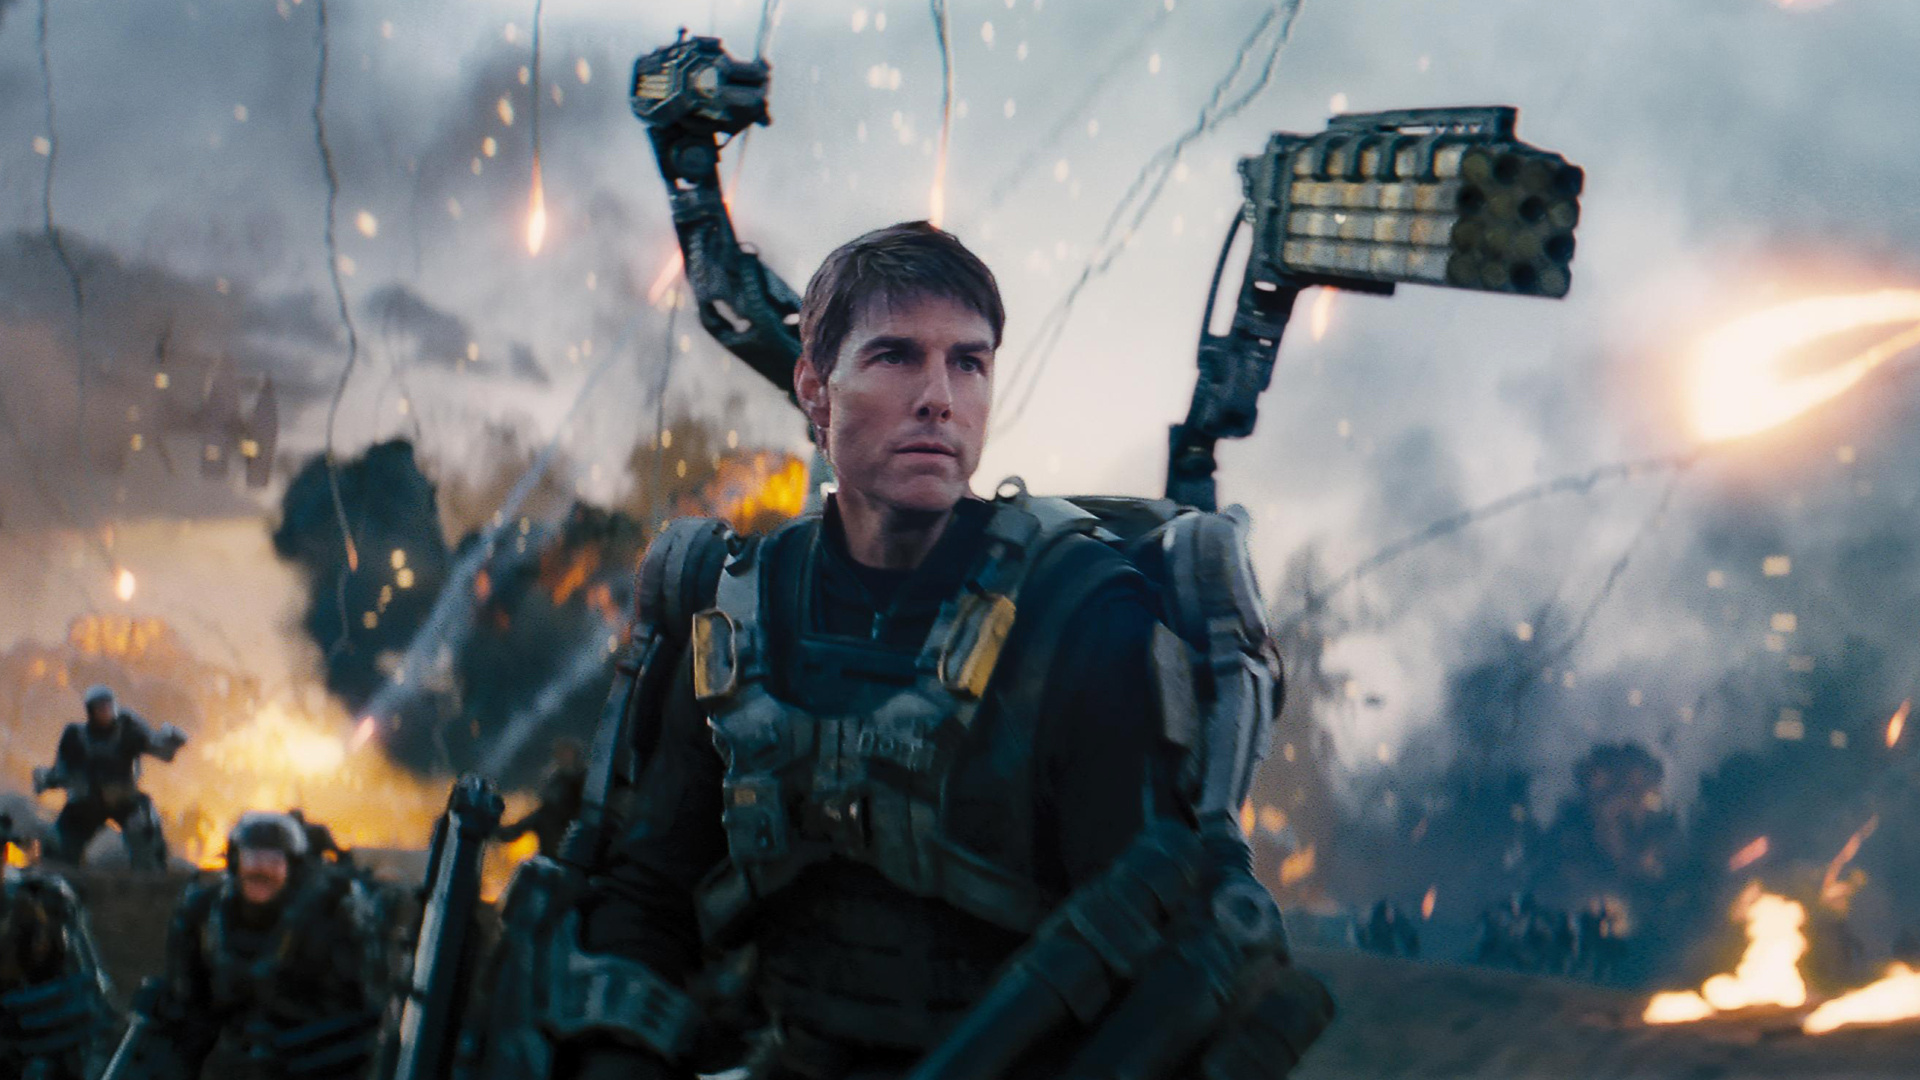 Edge of Tomorrow: Major in the United Defense Force (UDF), The mimic invasion. 1920x1080 Full HD Background.